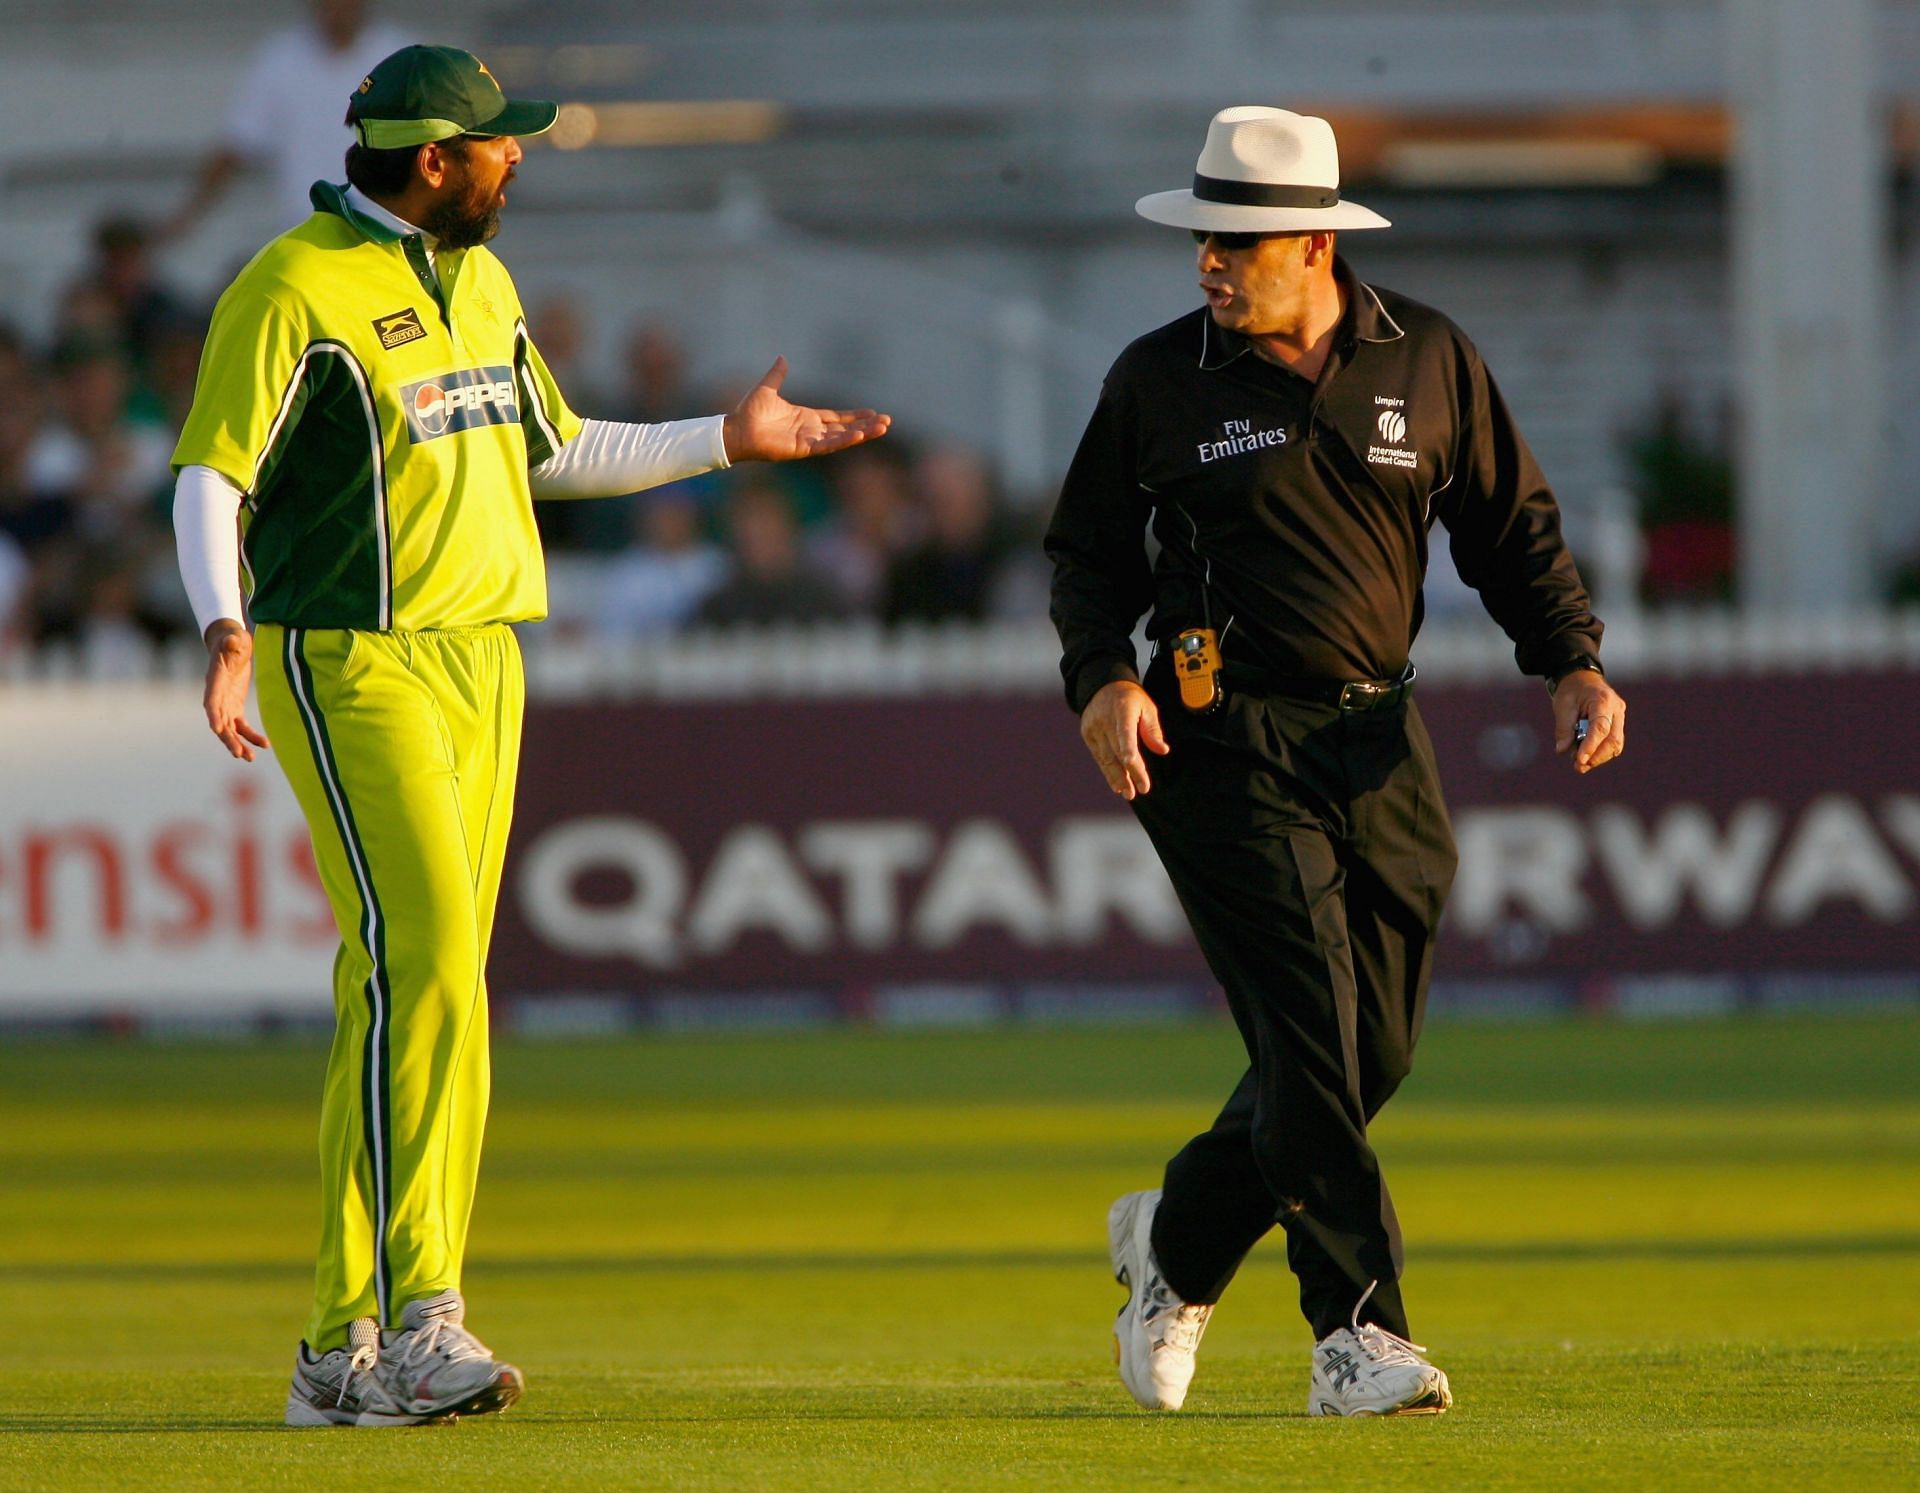 Inzamam was appointed chairman of selectors